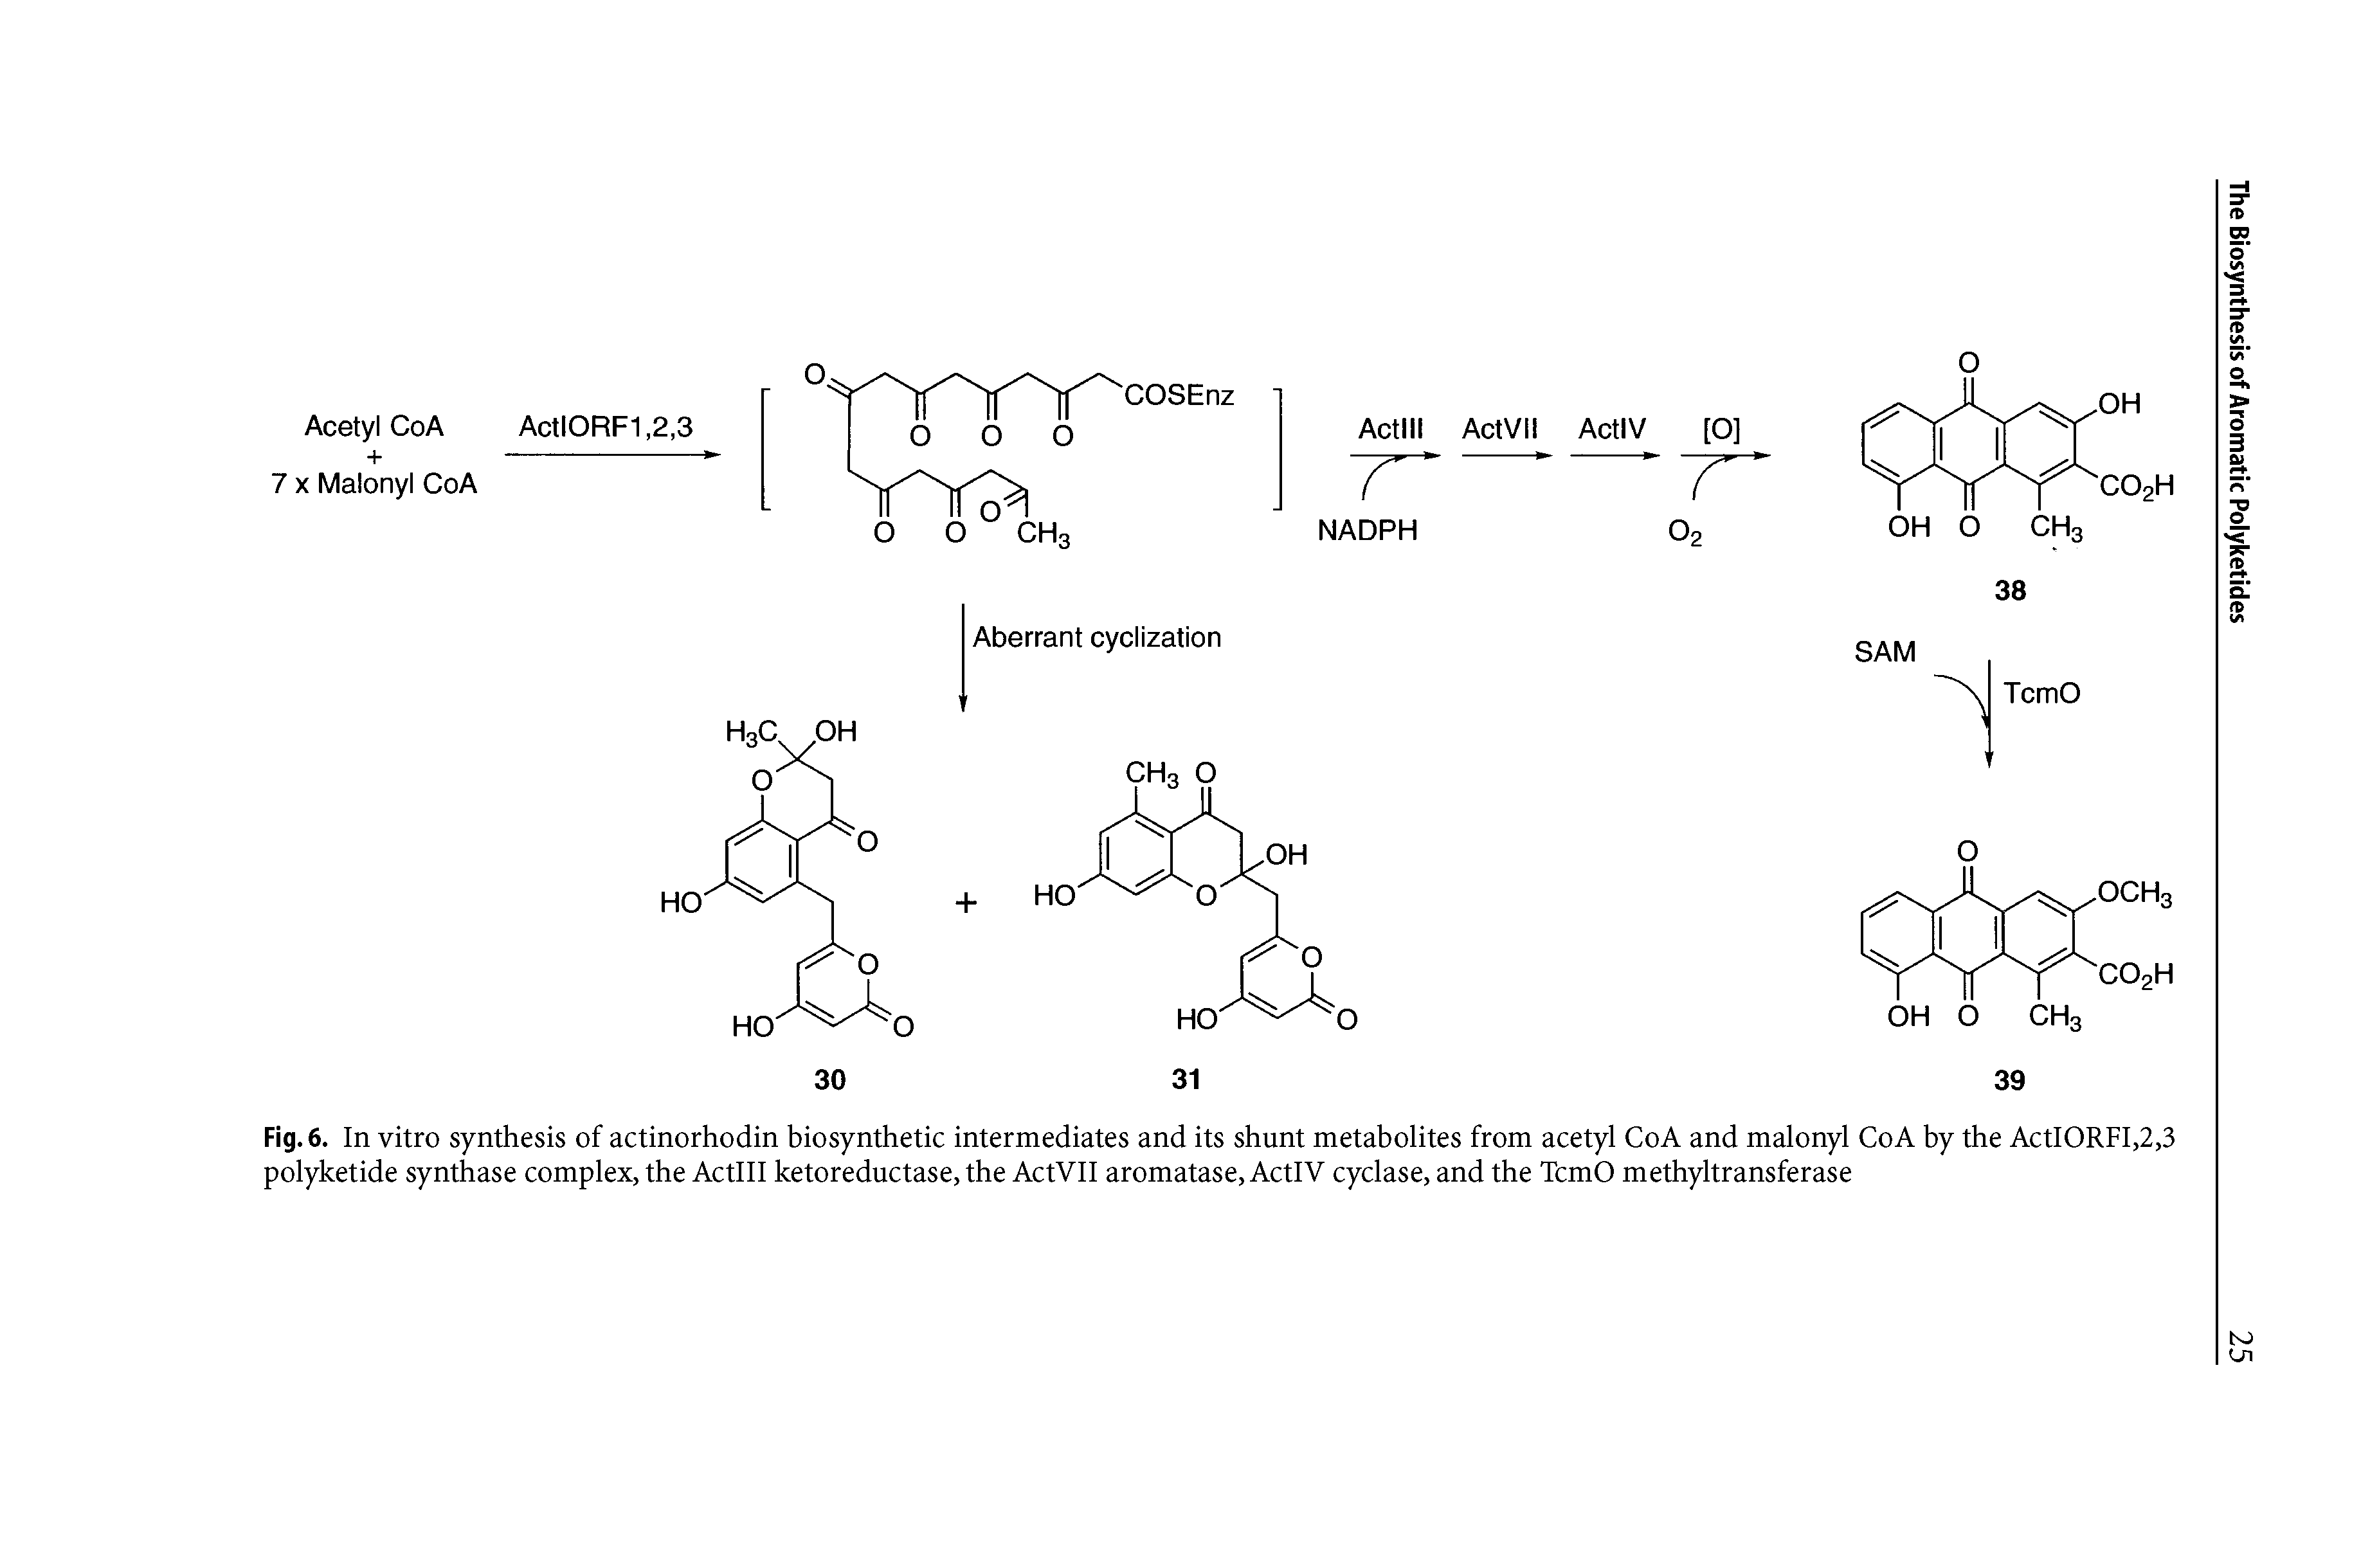 Fig. 6. In vitro synthesis of actinorhodin biosynthetic intermediates and its shunt metabolites from acetyl CoA and malonyl CoA by the ActIORFI,2,3 polyketide synthase complex, the Actlll ketoreductase, the ActVII aromatase, ActIV cyclase, and the TcmO methyltransferase...